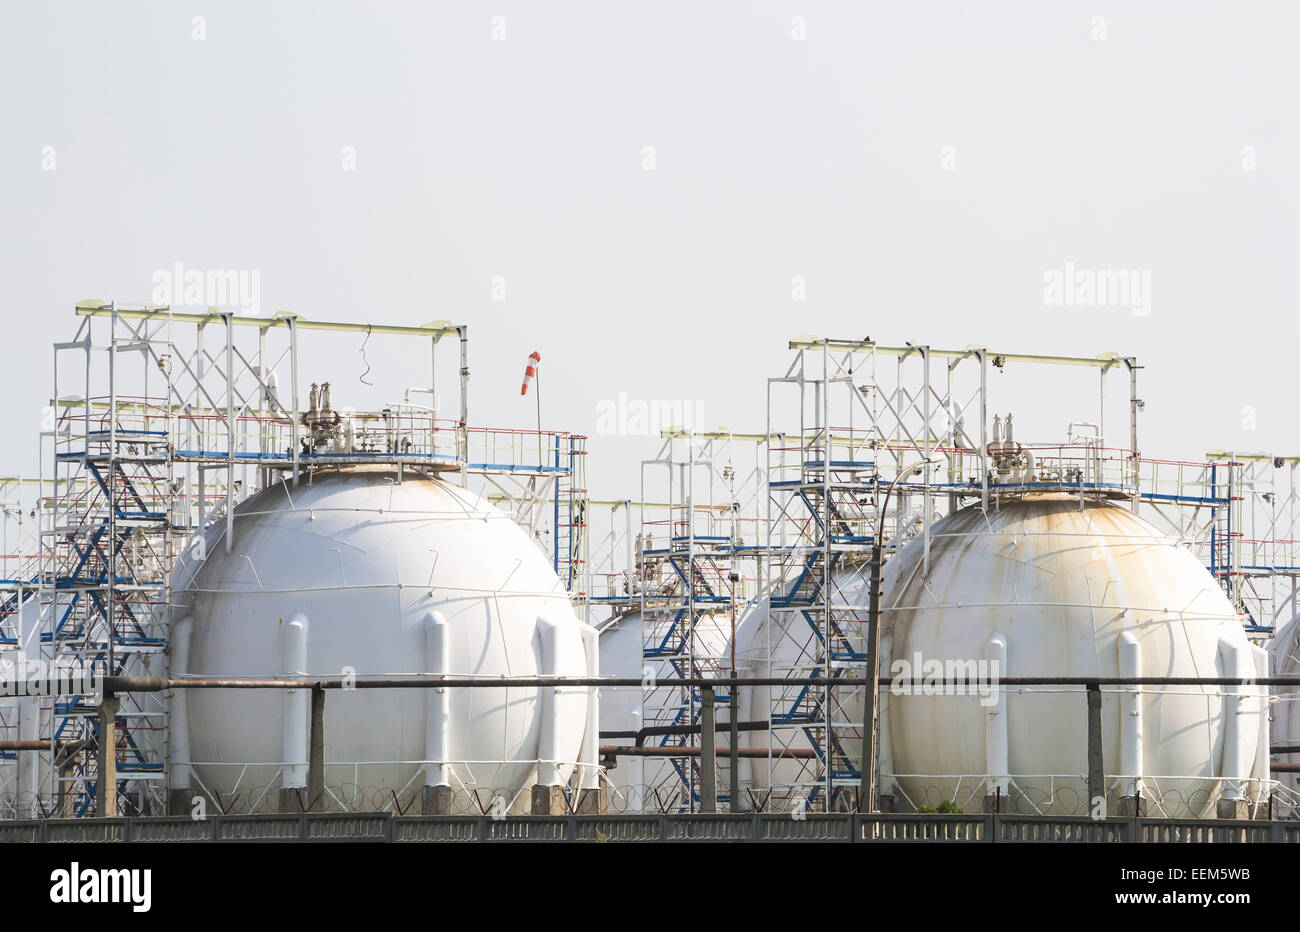 Fuel storage tanks on an oil and gas refinery area Stock Photo